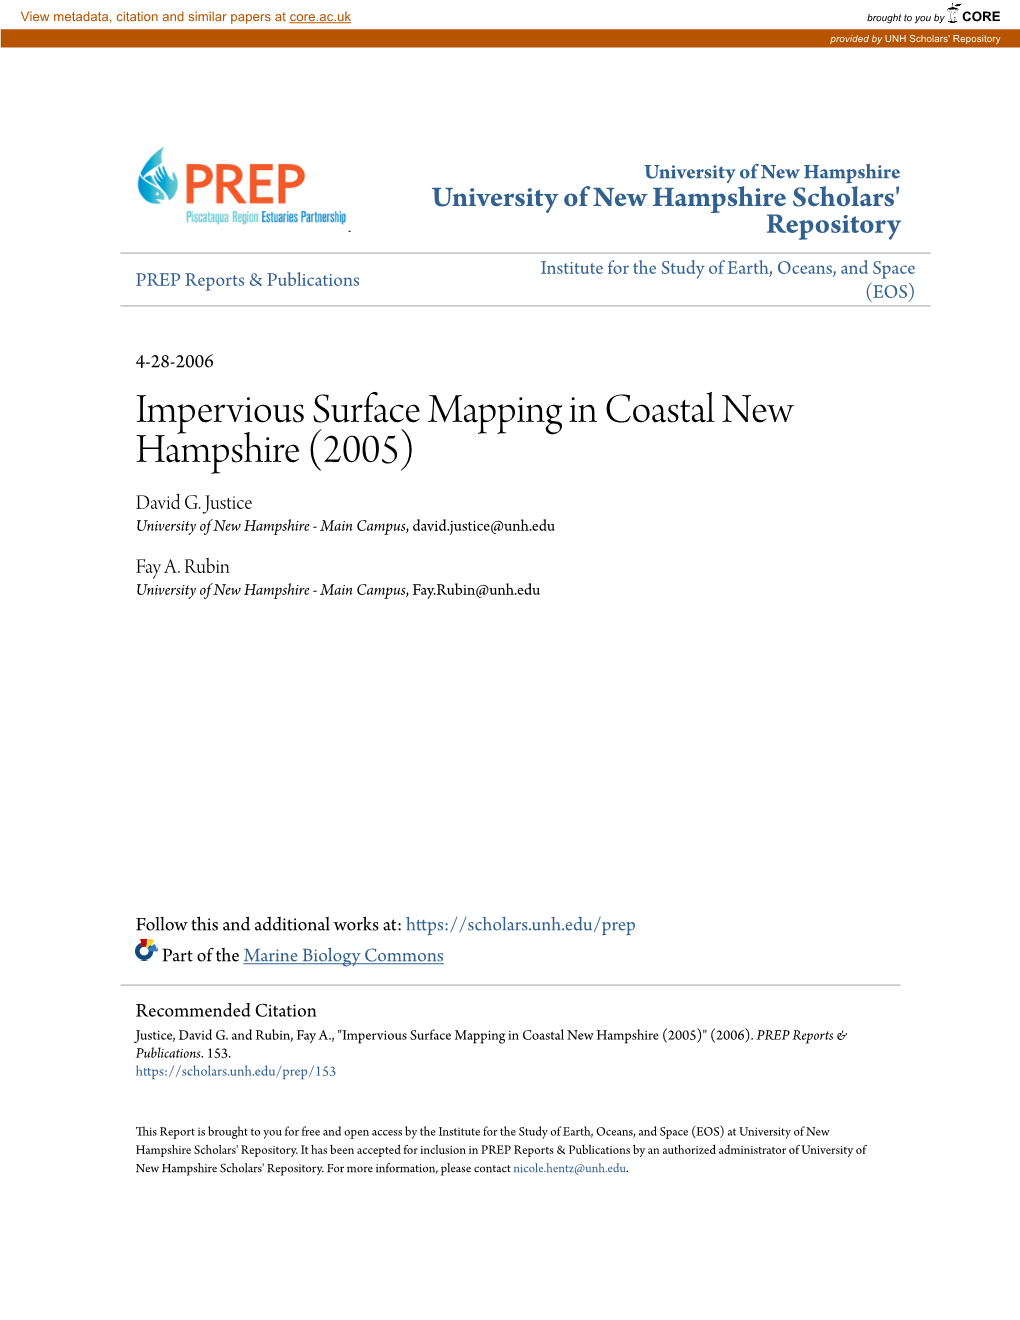 Impervious Surface Mapping in Coastal New Hampshire (2005) David G